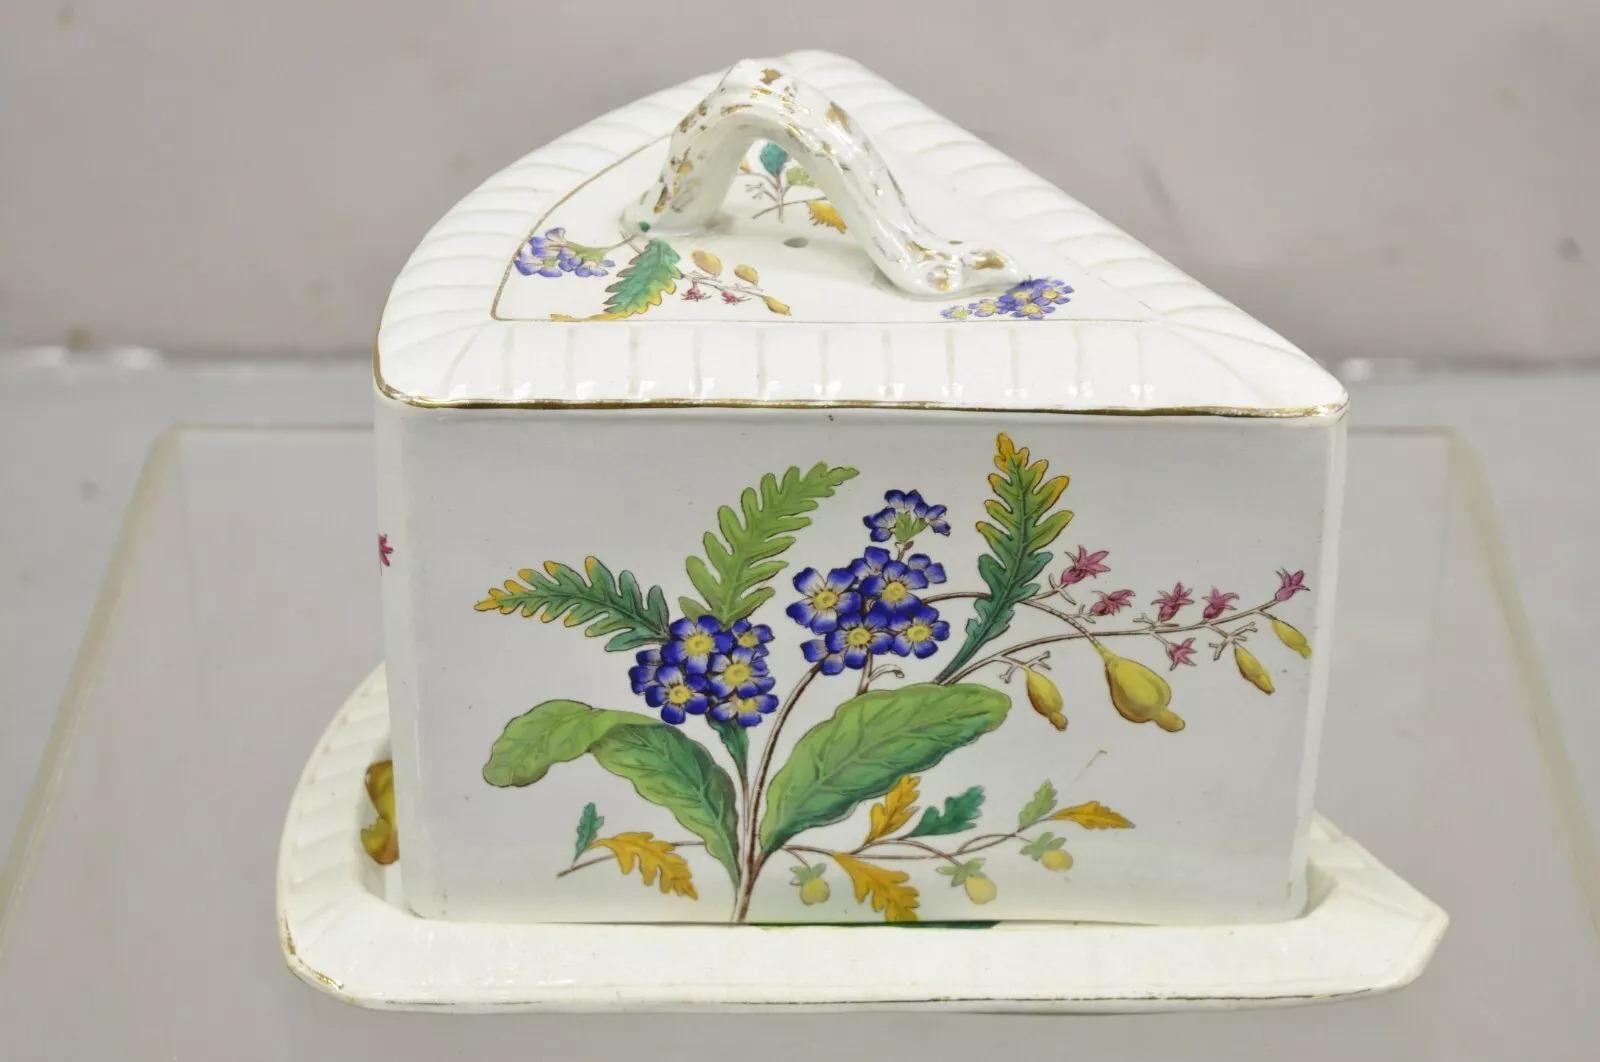 Antique Victorian Large Porcelain Covered Cheese Dish with Flowers and Leaves. Circa 19th Century. Measurements: 8.5